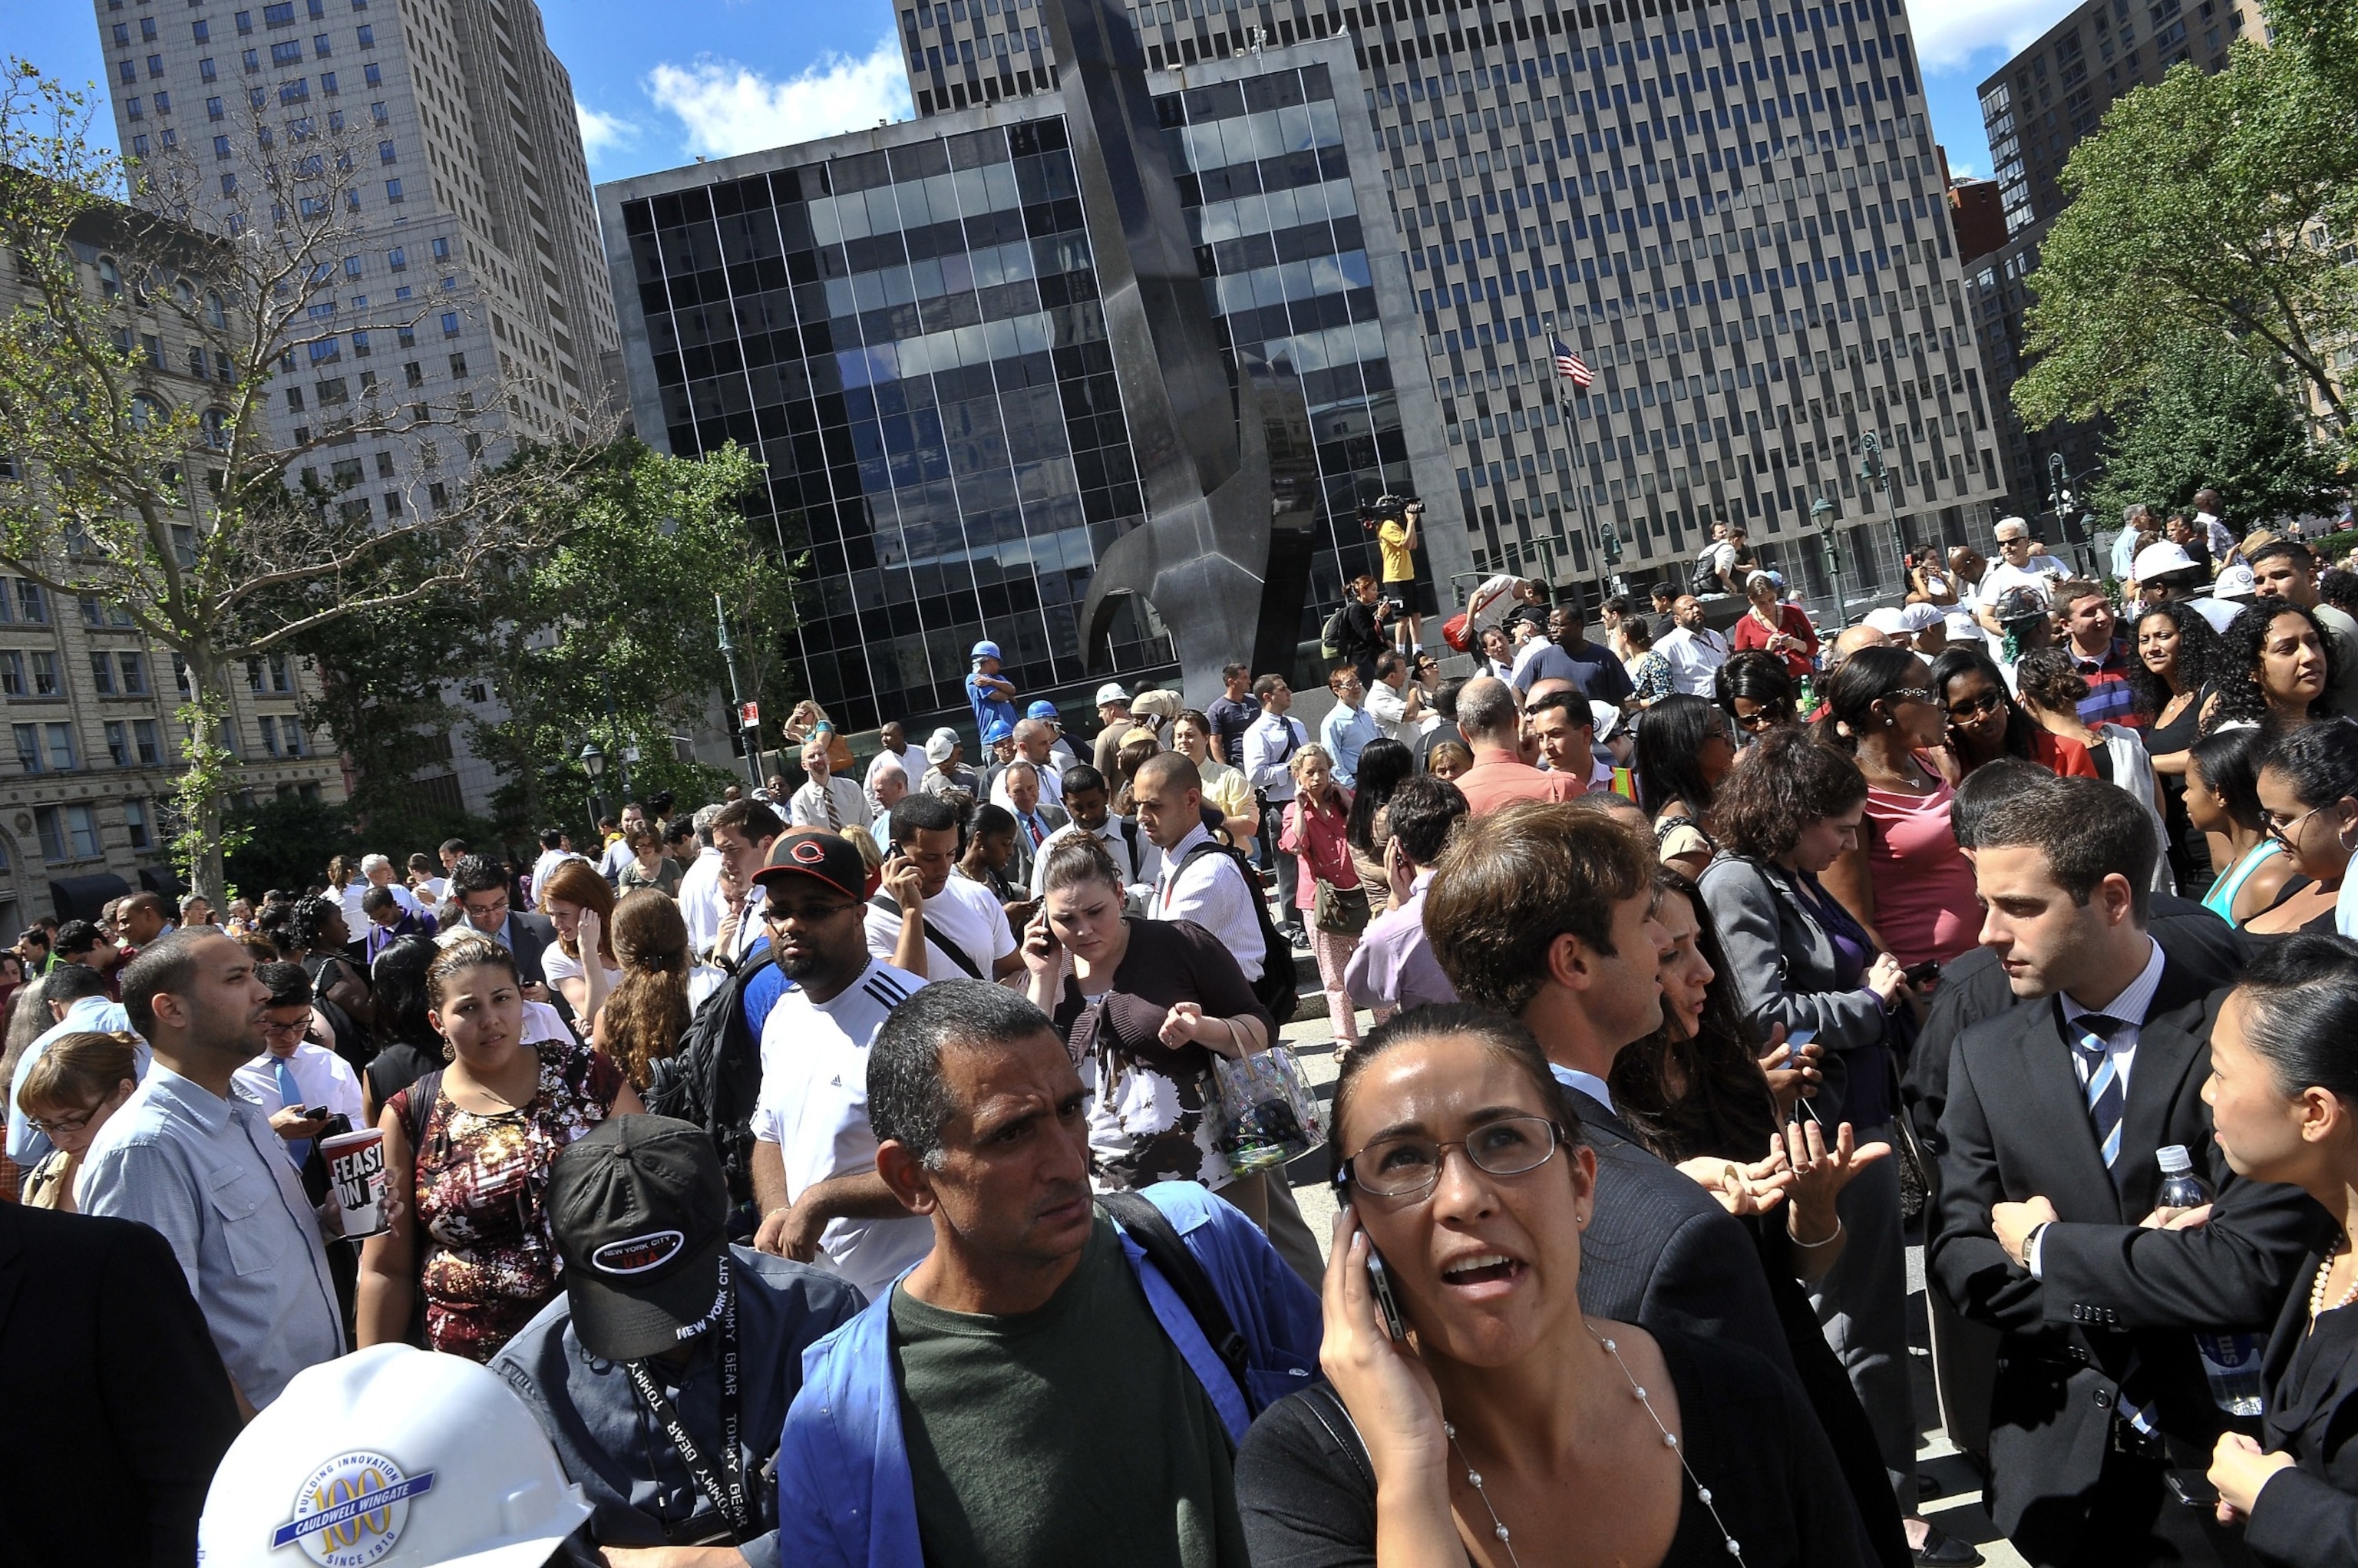 PHOTO: People stand in a square outside the courthouse after an earthquake was felt in New York City, Aug. 23, 2011.